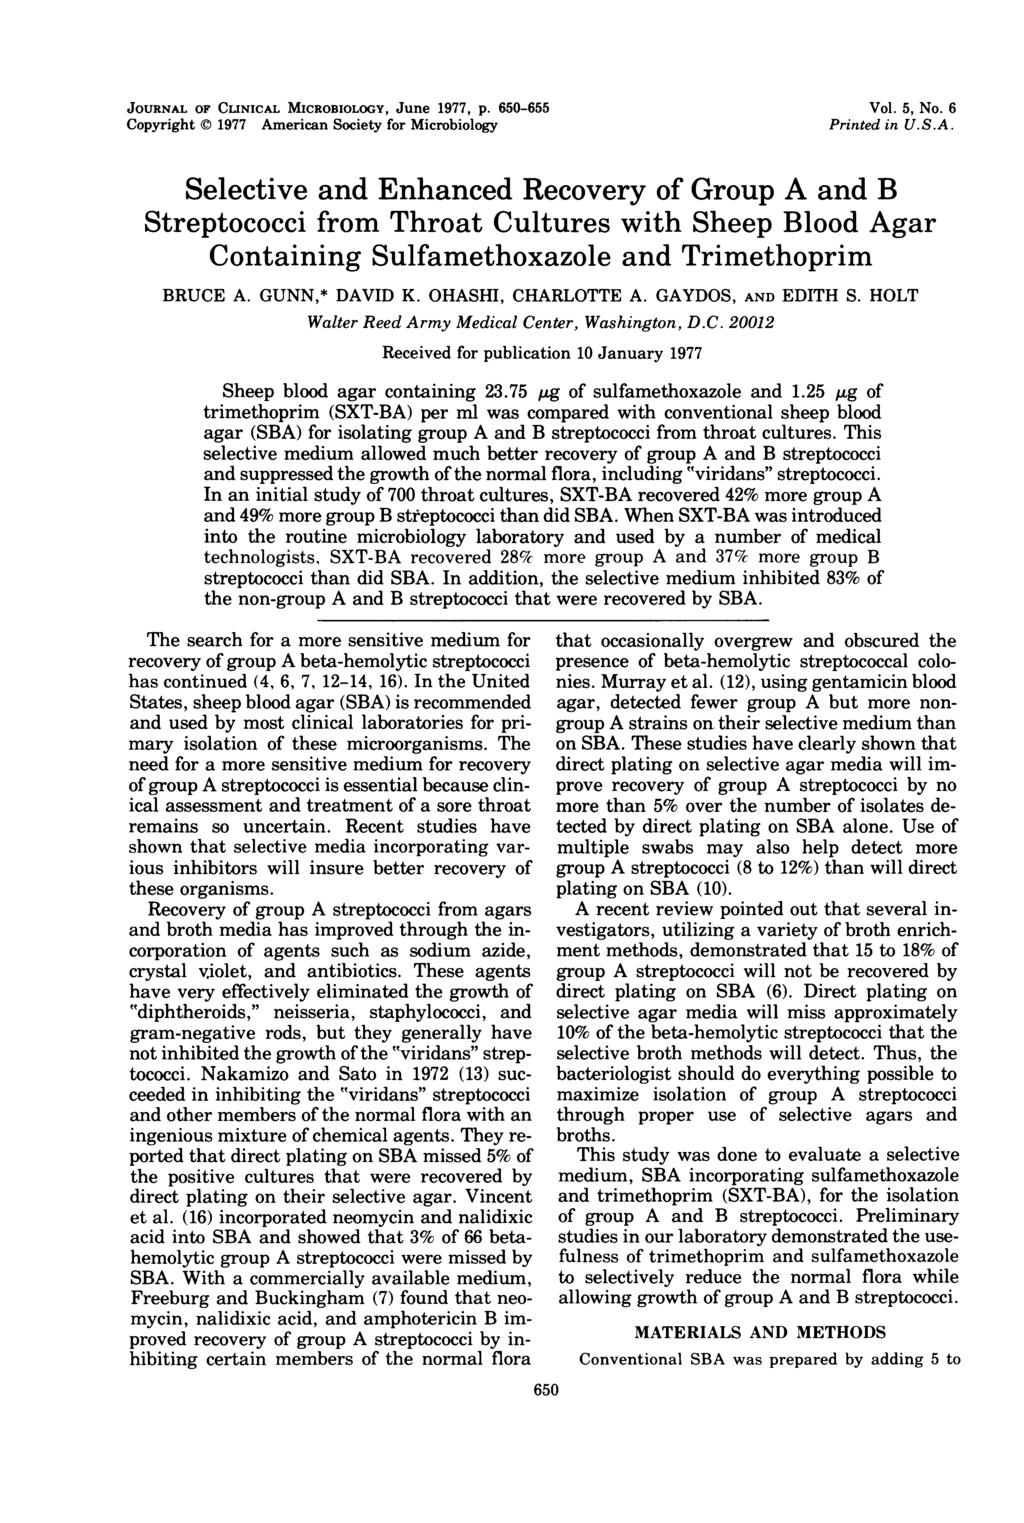 JOURNAL OF CLINICAL MICROBIOLOGY, June 1977, p. 650-655 Copyright C) 1977 American Society for Microbiology Vol. 5, No. 6 Printed in U.S.A. Selective and Enhanced Recovery of Group A and B Streptococci from Throat Cultures with Sheep Blood Agar Containing Sulfamethoxazole and Trimethoprim BRUCE A.